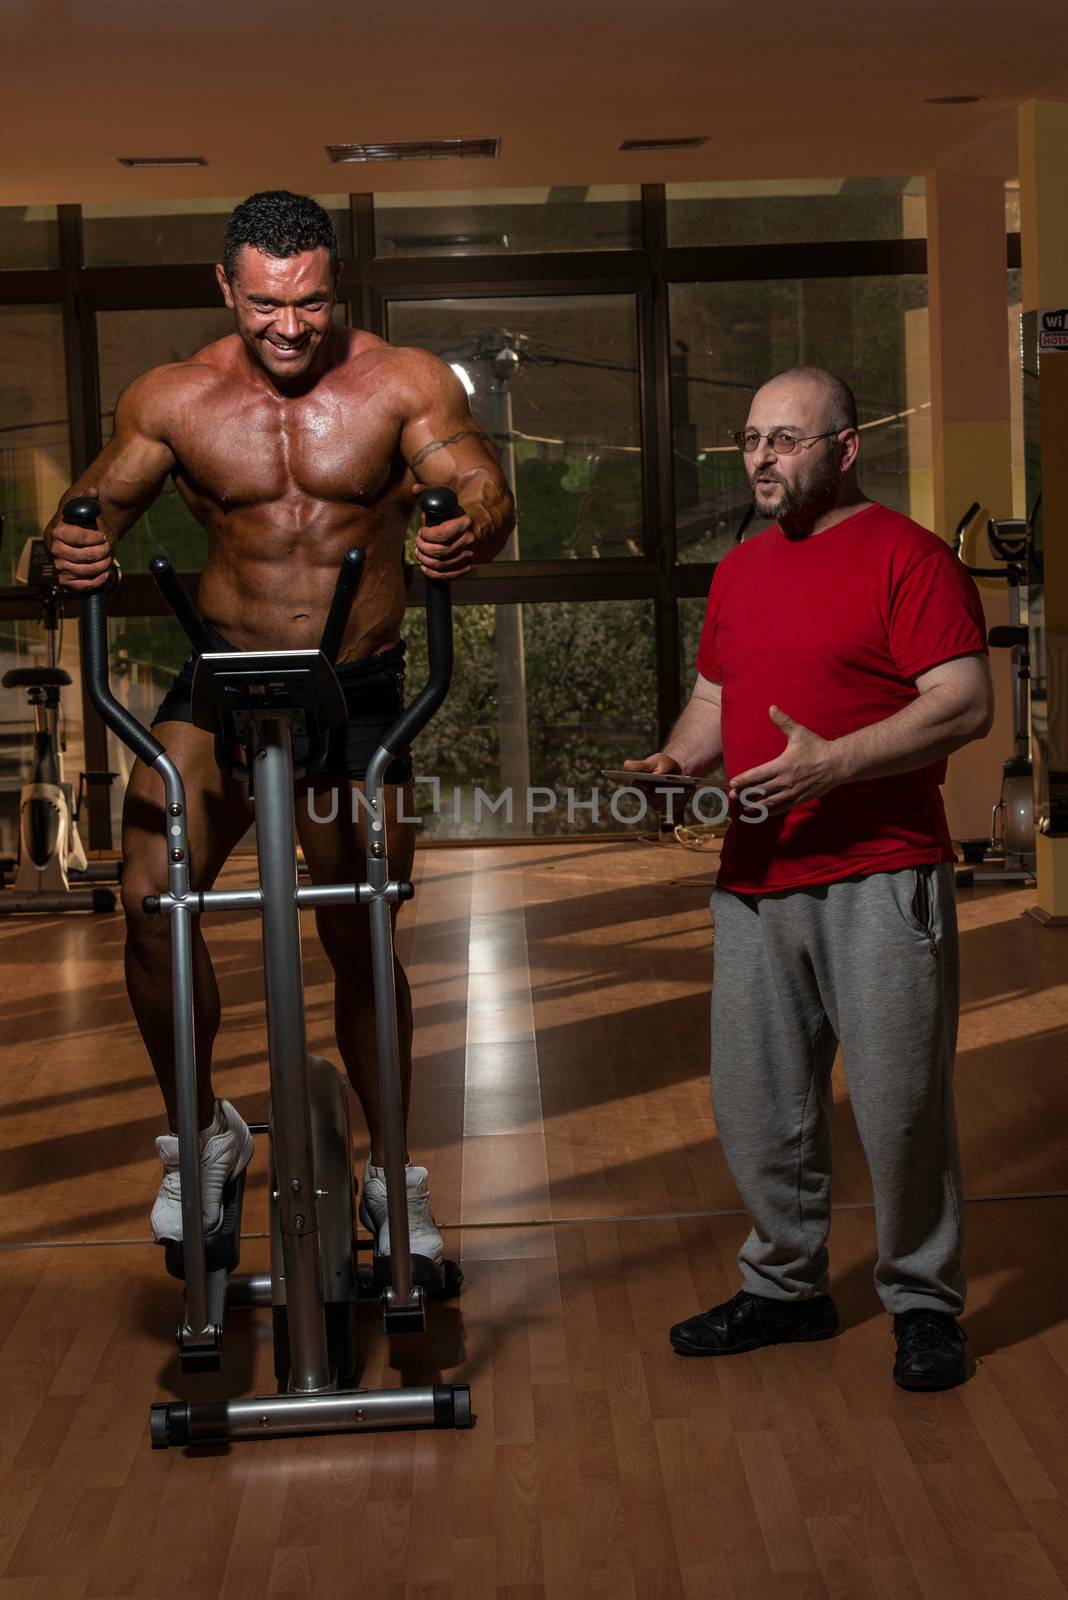 training in gym where partner gives encouragement